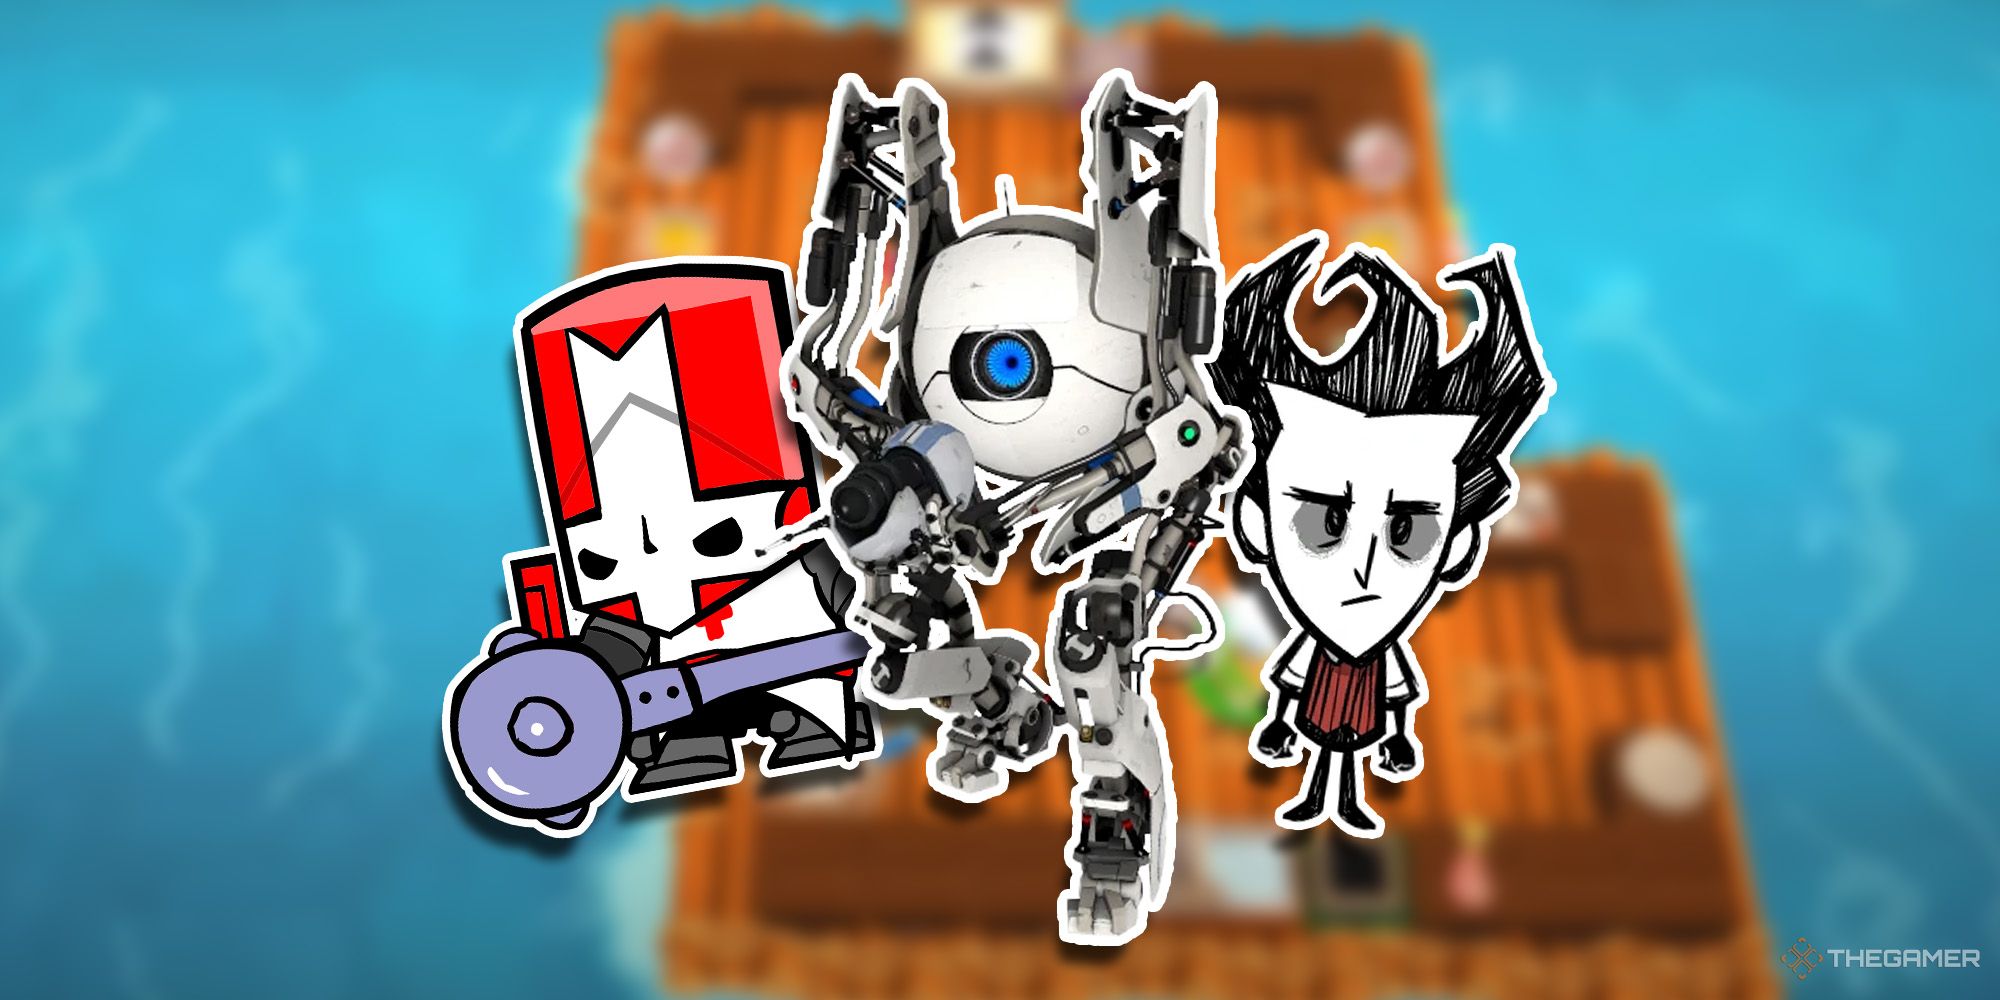 The Knight from Castle Crashers, Atlas from Portal 2, and Wilson from Don't Starve Together